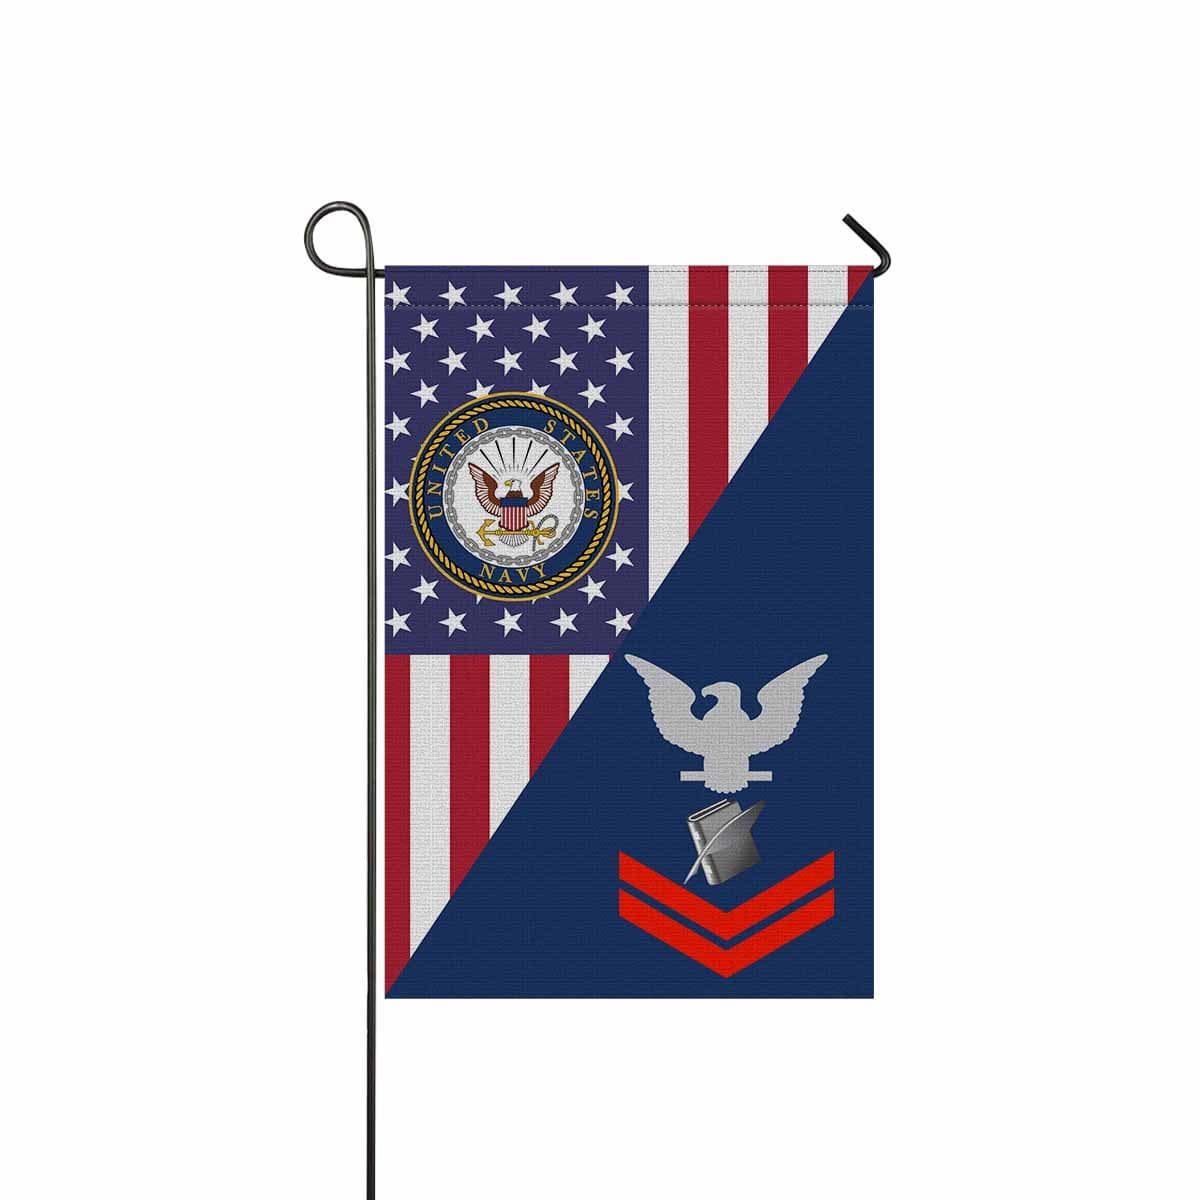 Navy Personnel Specialist Navy PS E-5 Red Stripe Garden Flag/Yard Flag 12 inches x 18 inches Twin-Side Printing-GDFlag-Navy-Rating-Veterans Nation